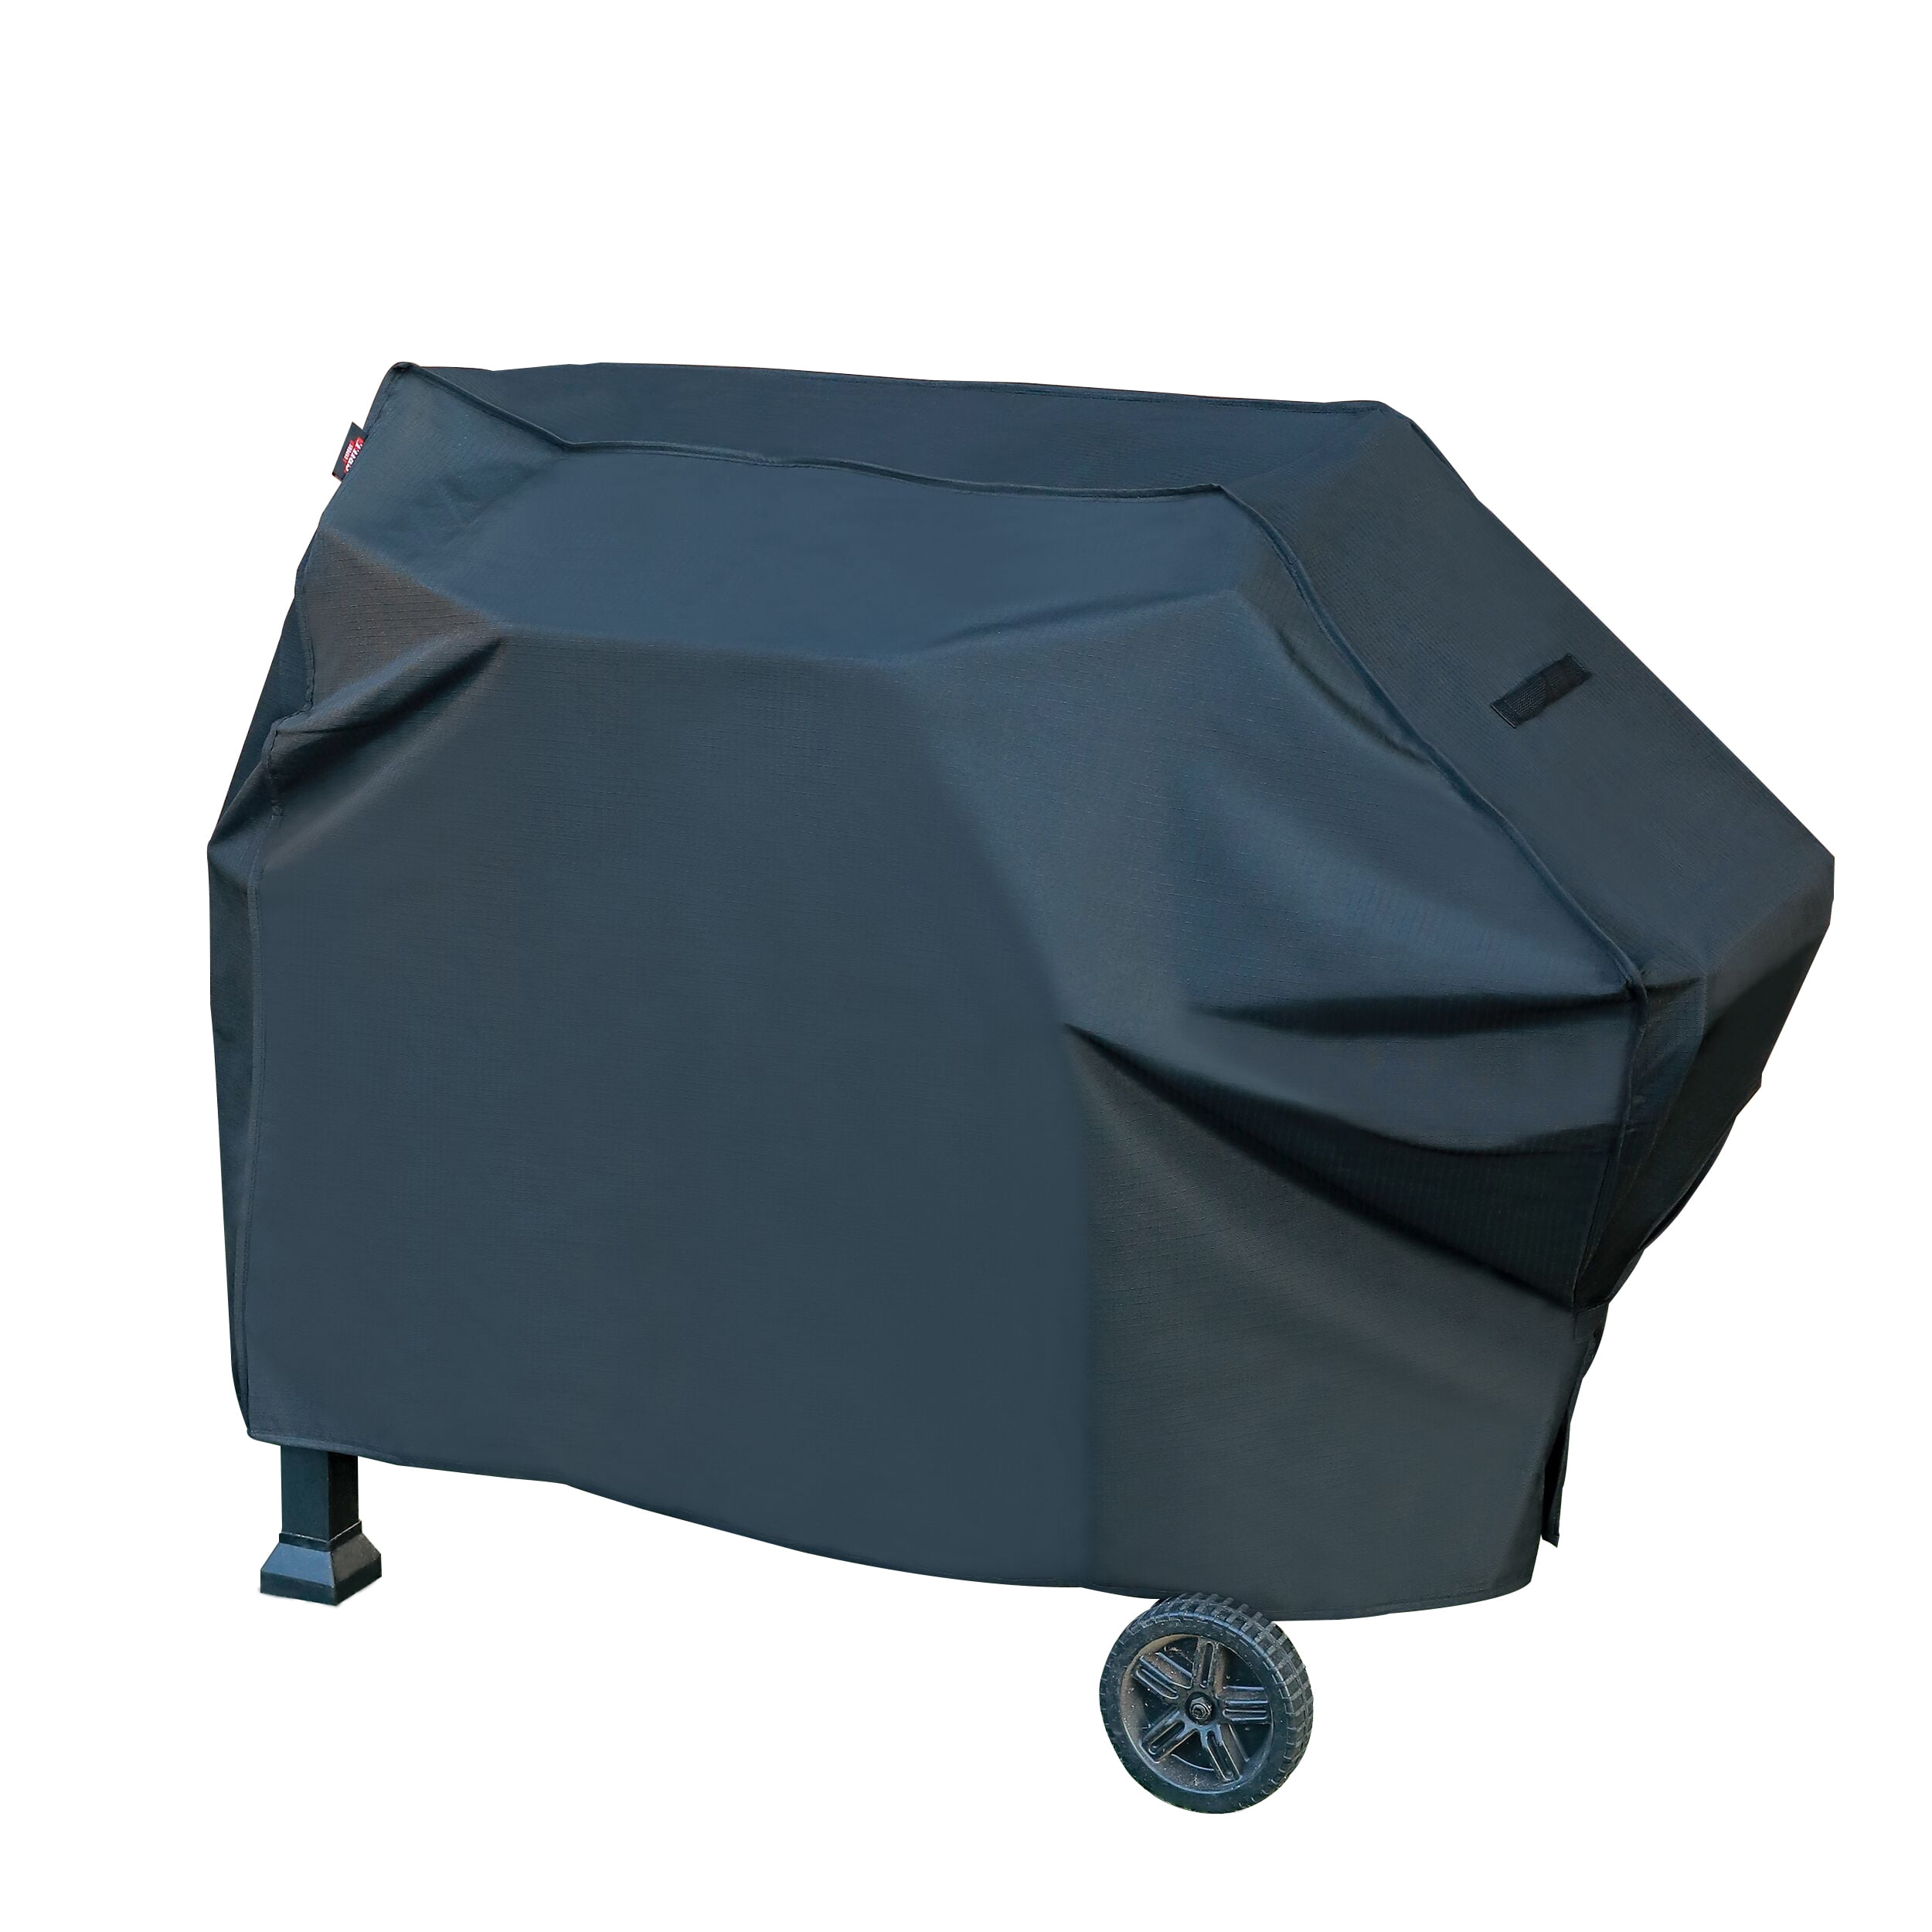 Expert Grill Heavy Duty Charcoal Grill Cover, Black